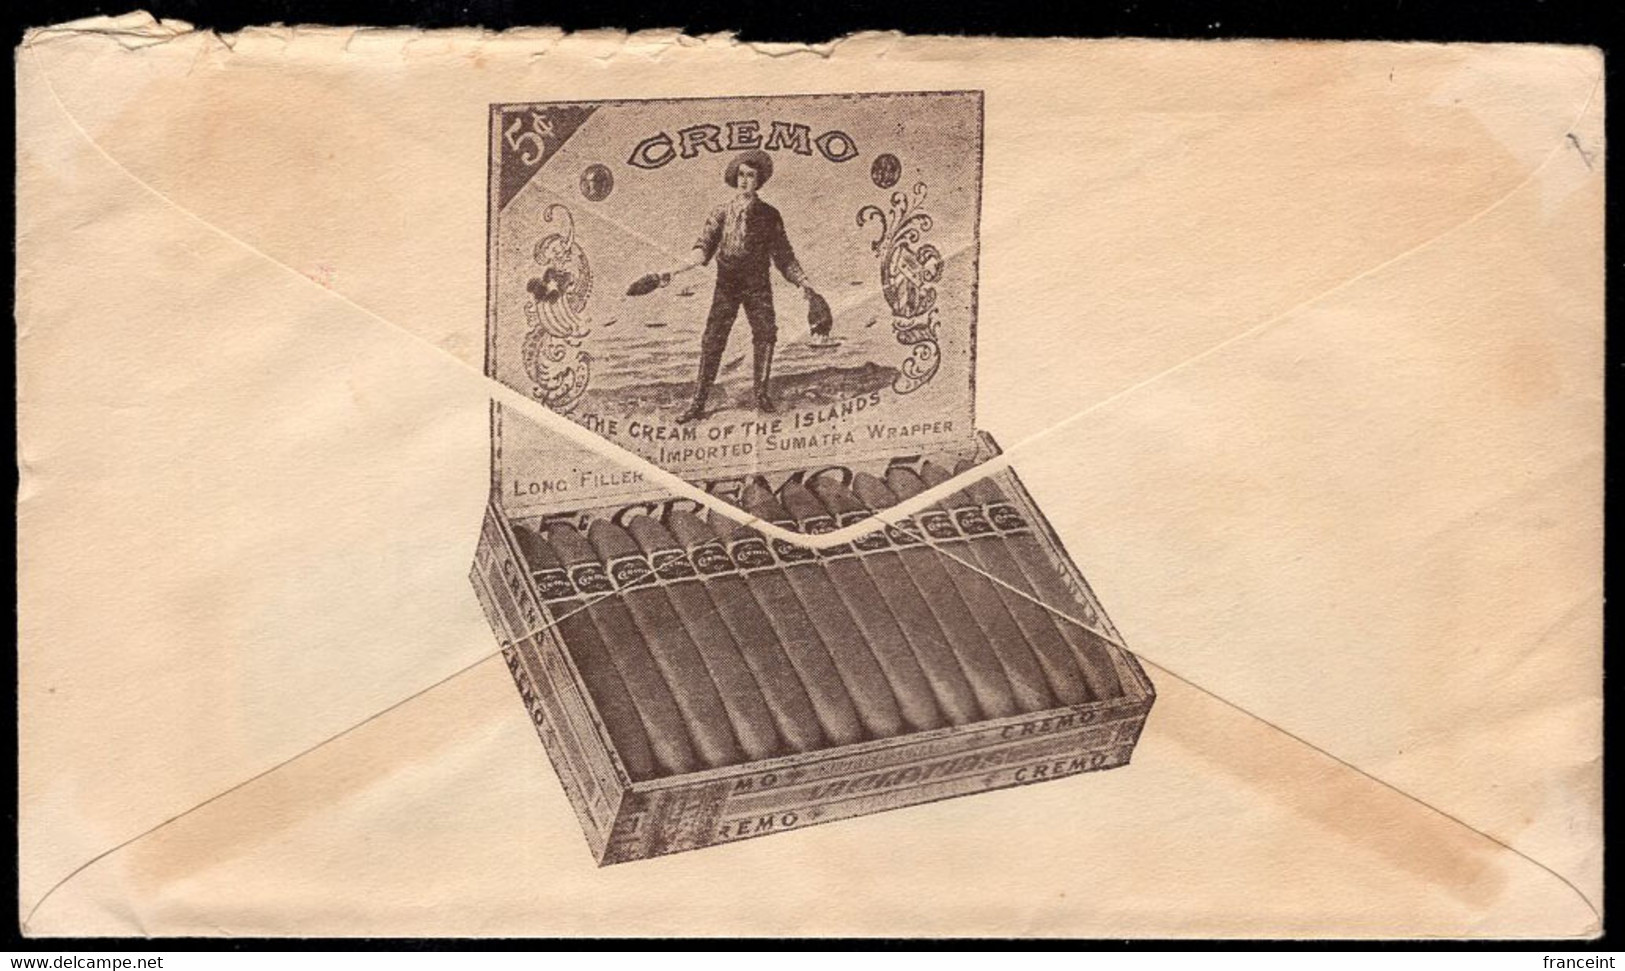 U.S.A.(1926) Box Of Cigars. Postal Stationery Envelope With Corner Ad And Illustration On Back For Chancellor Cigars. - 1921-40